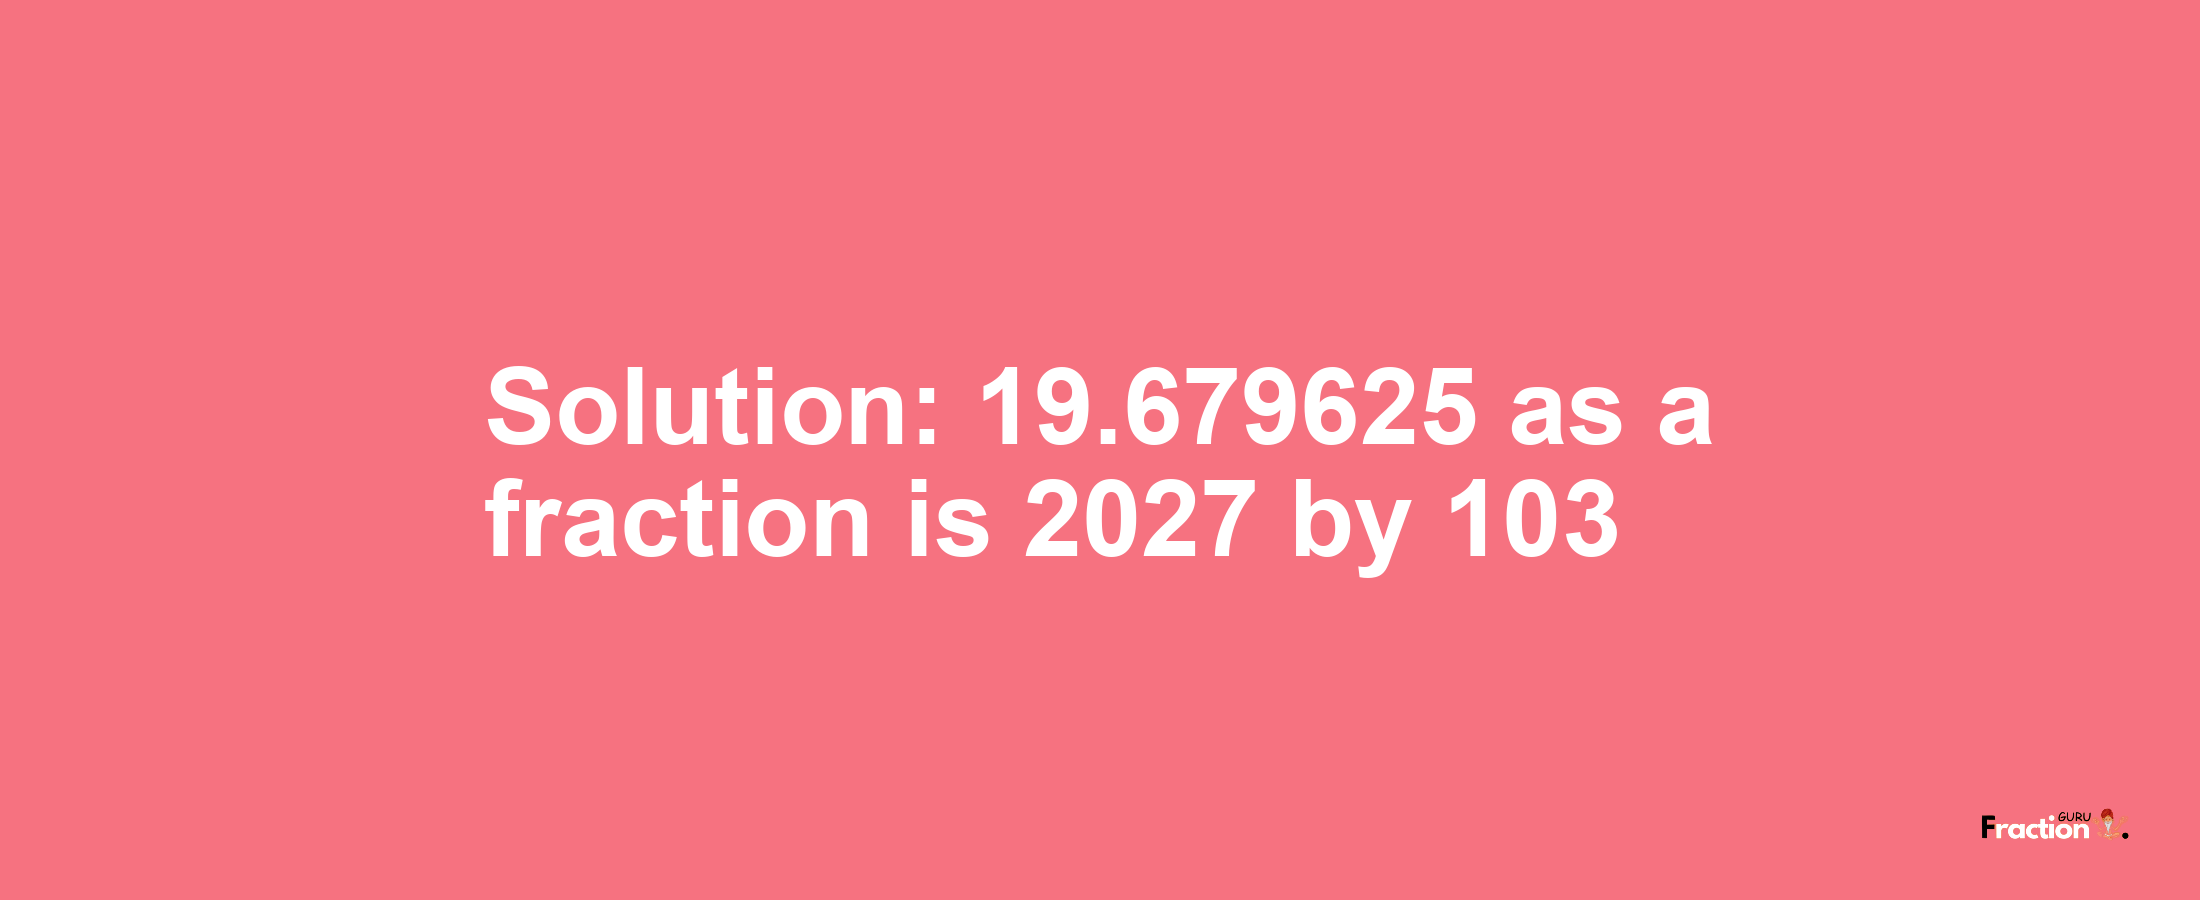 Solution:19.679625 as a fraction is 2027/103